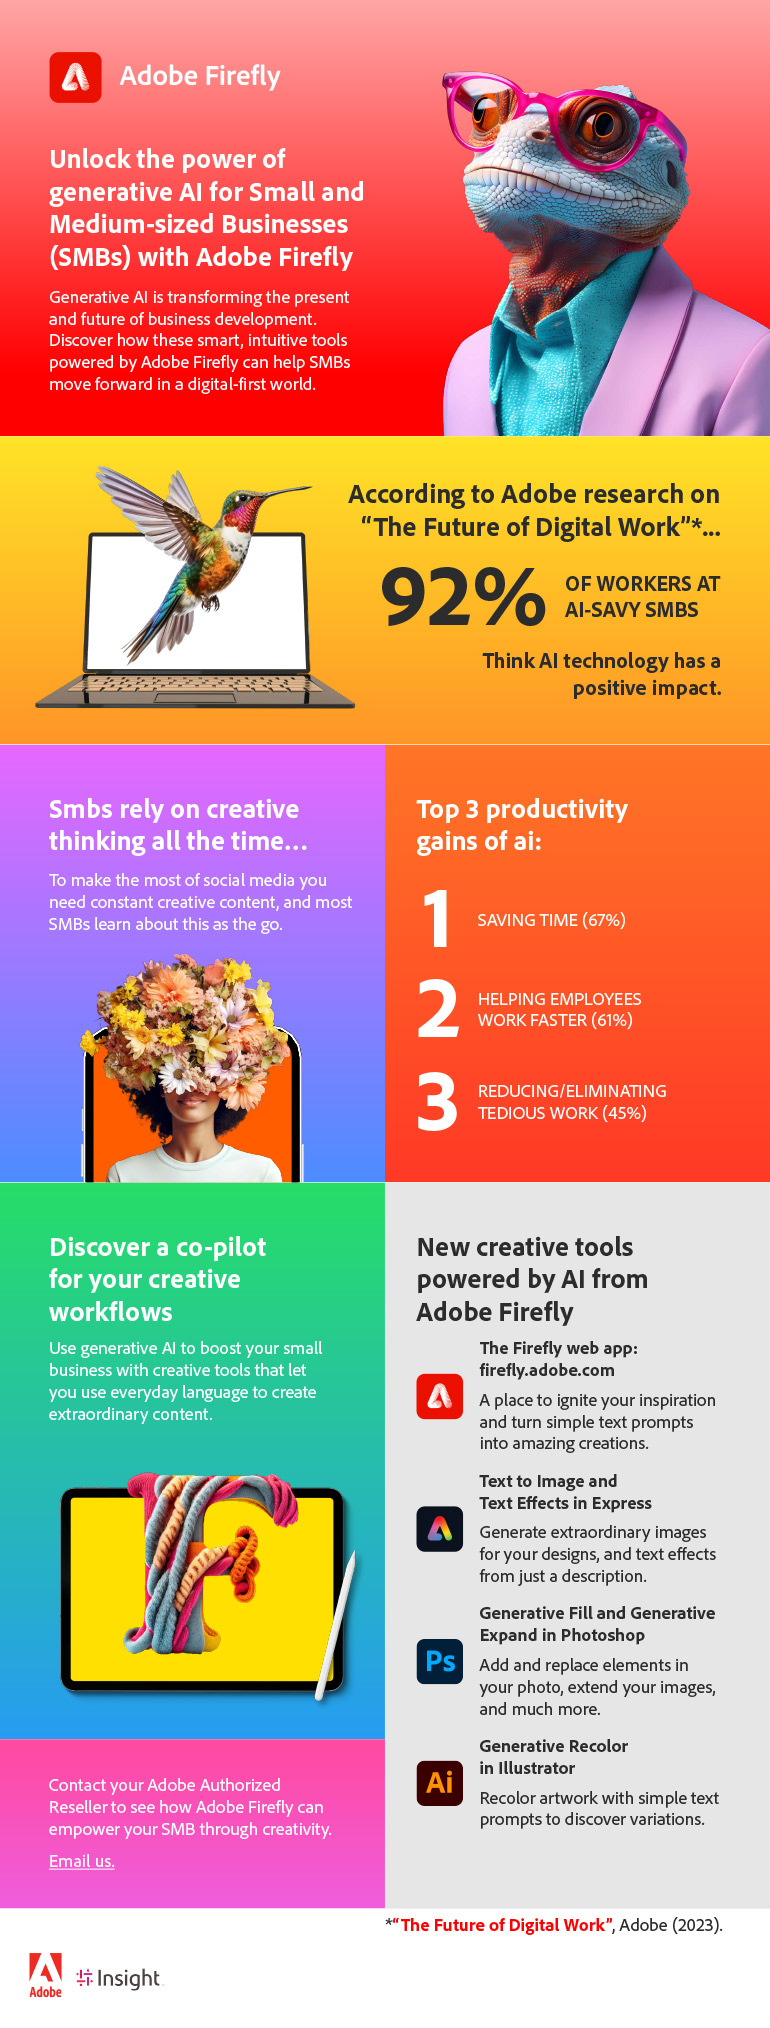 Unlock the Power of Generative AI for Small and Medium-Sized Businesses with Adobe Firefly. Translated below.